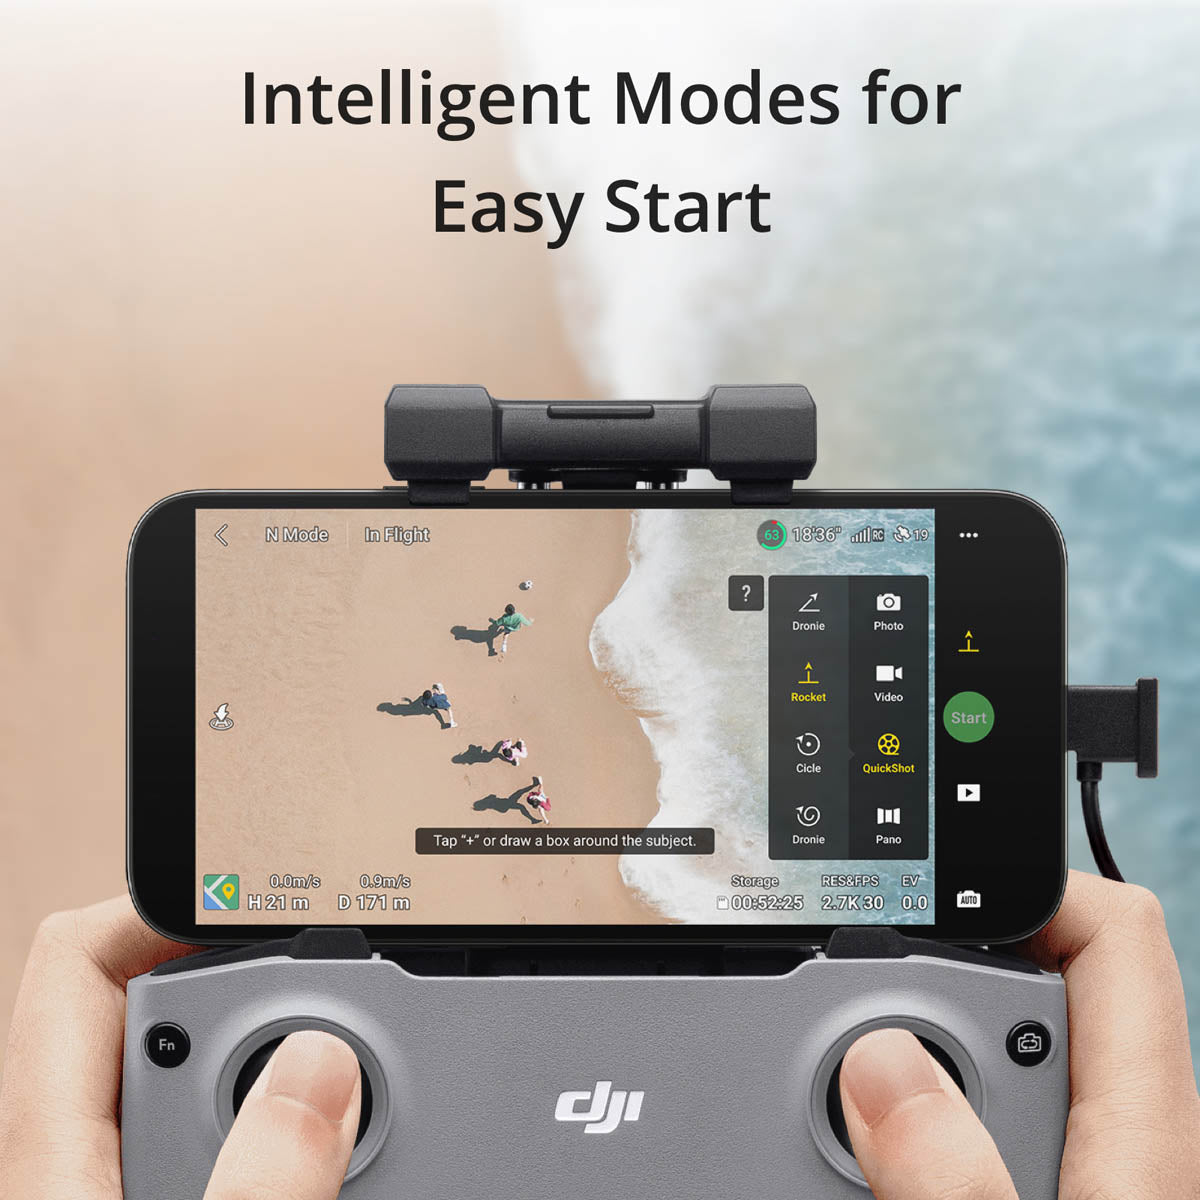 DJI Mini 2 SE Fly More Combo Drone with Remote Control Gray  CP.MA.00000574.01 - Best Buy